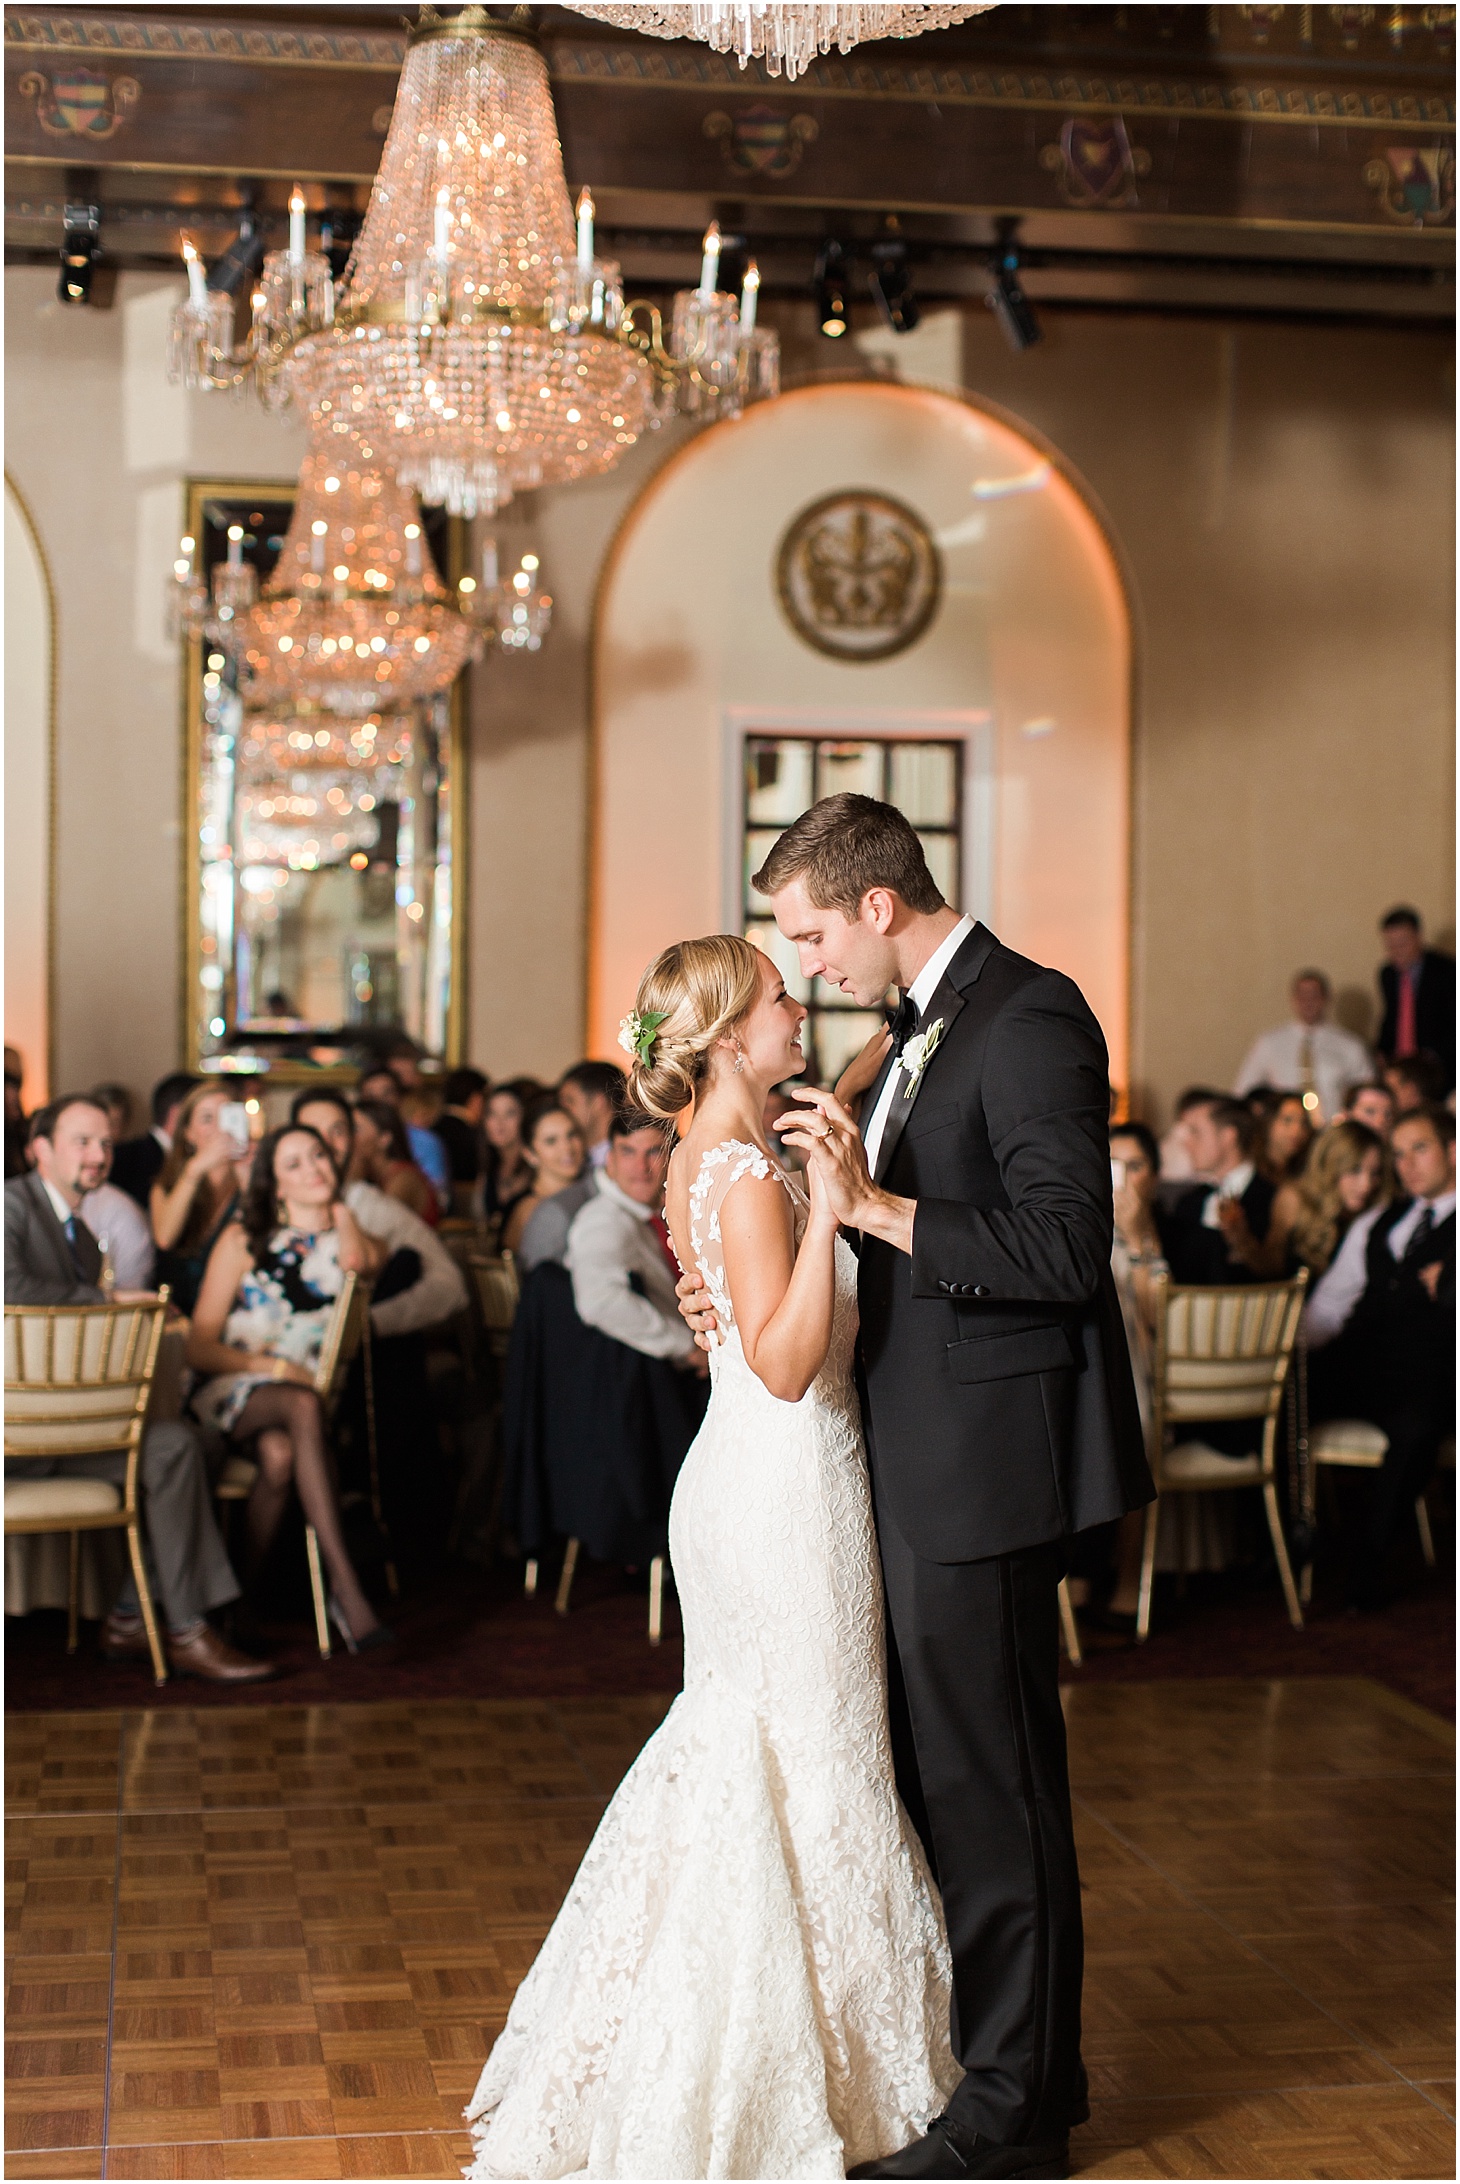 First Dance at the St. Regis Washington, DC Wedding Reception | Southern Black Tie Wedding in Dusty Blue and Ivory | Sarah Bradshaw Photography